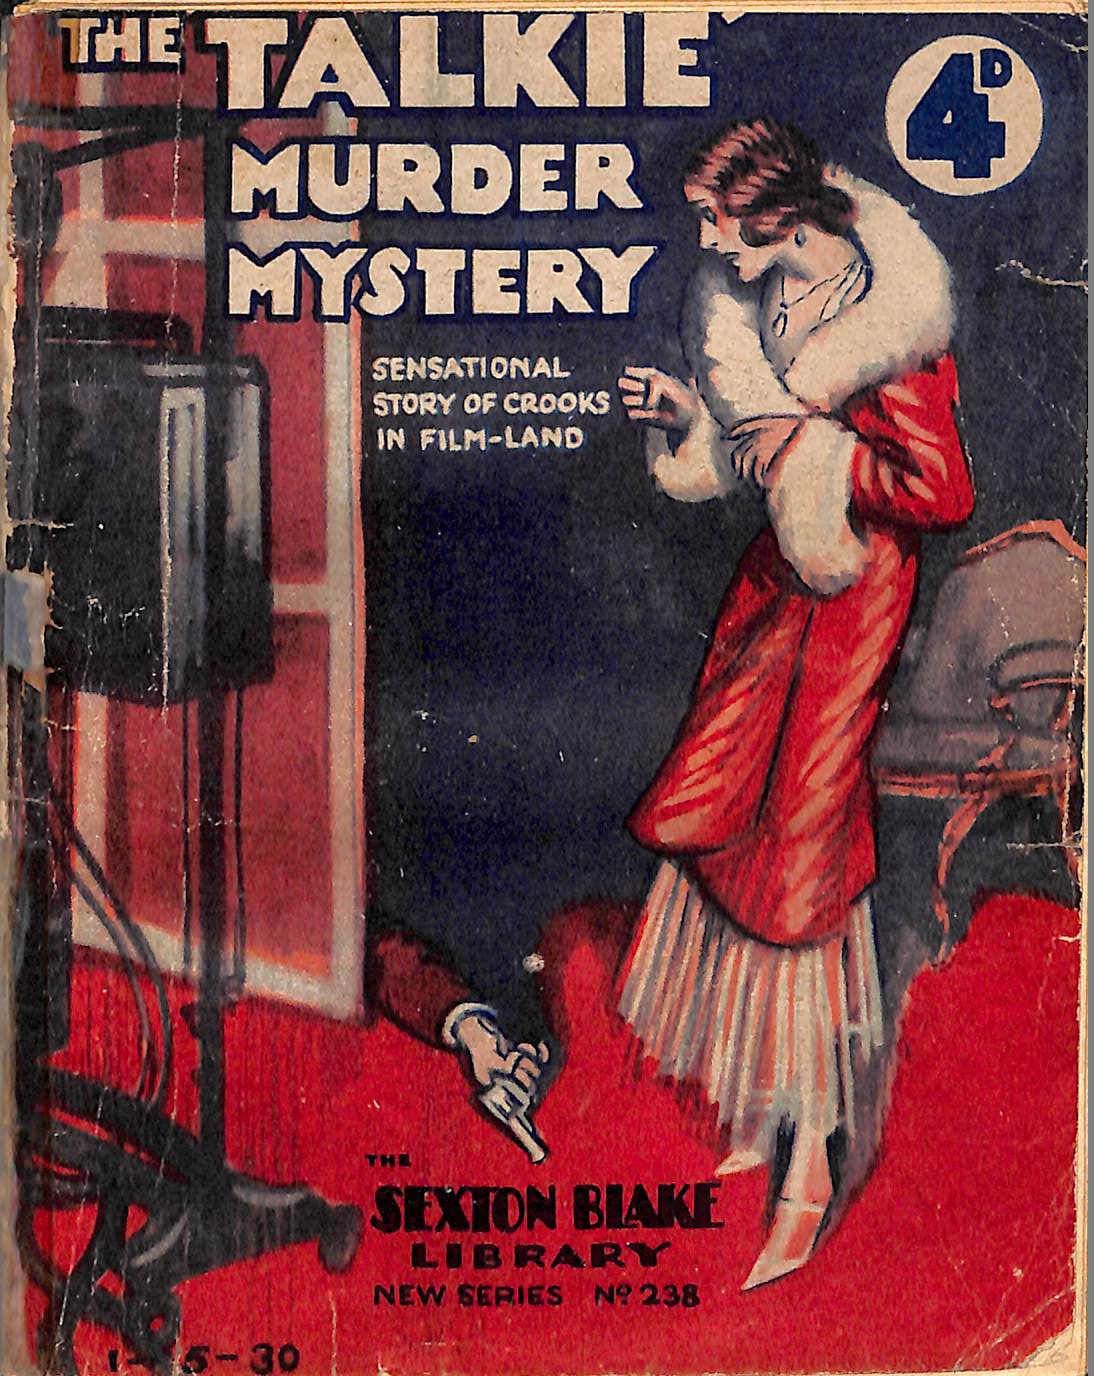 Book Cover For Sexton Blake Library S2 238 - The 'Talkie' Murder Mystery